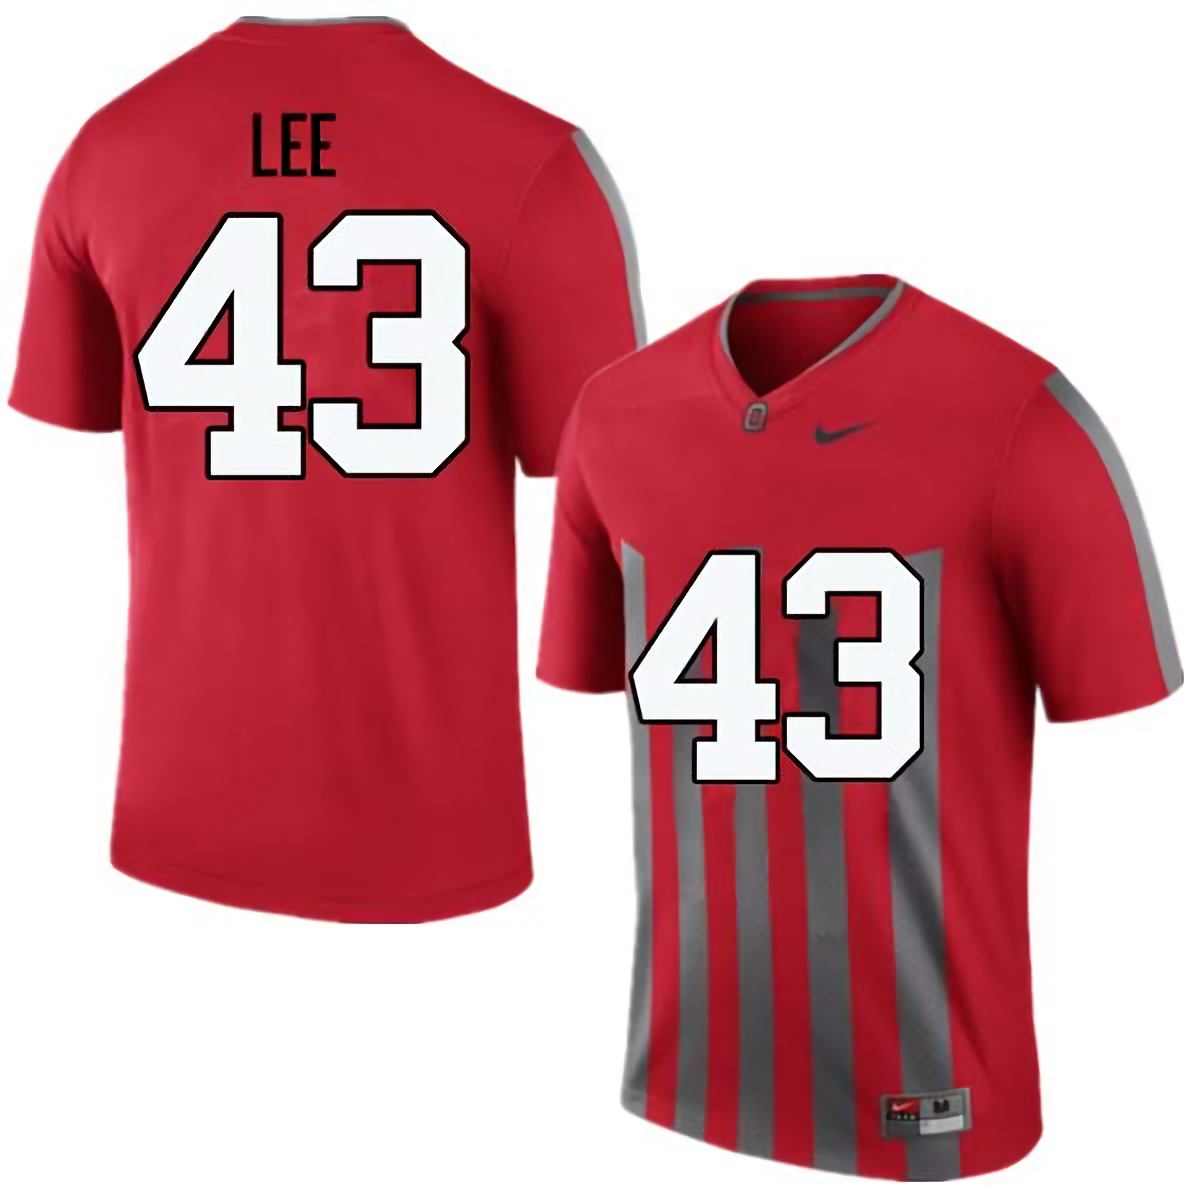 Darron Lee Ohio State Buckeyes Men's NCAA #43 Nike Throwback Red College Stitched Football Jersey OCU5756NP